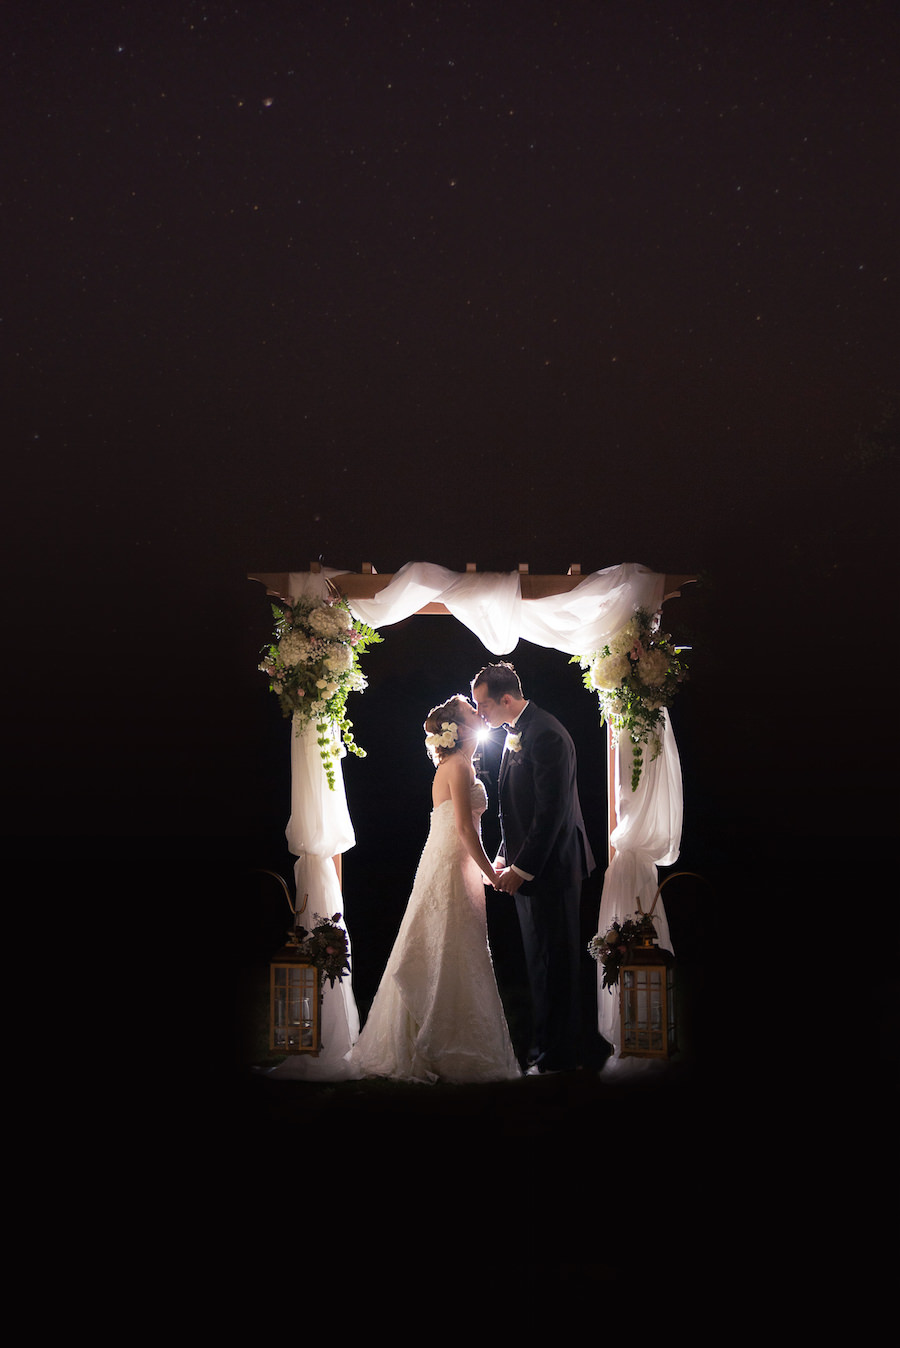 Bride and Groom Nighttime Wedding Portrait Under Ceremony Arch with Draping | Tampa Wedding Floral Designer Northside Florist | Tampa Golf Course Wedding Venue Hunter's Green Country Club